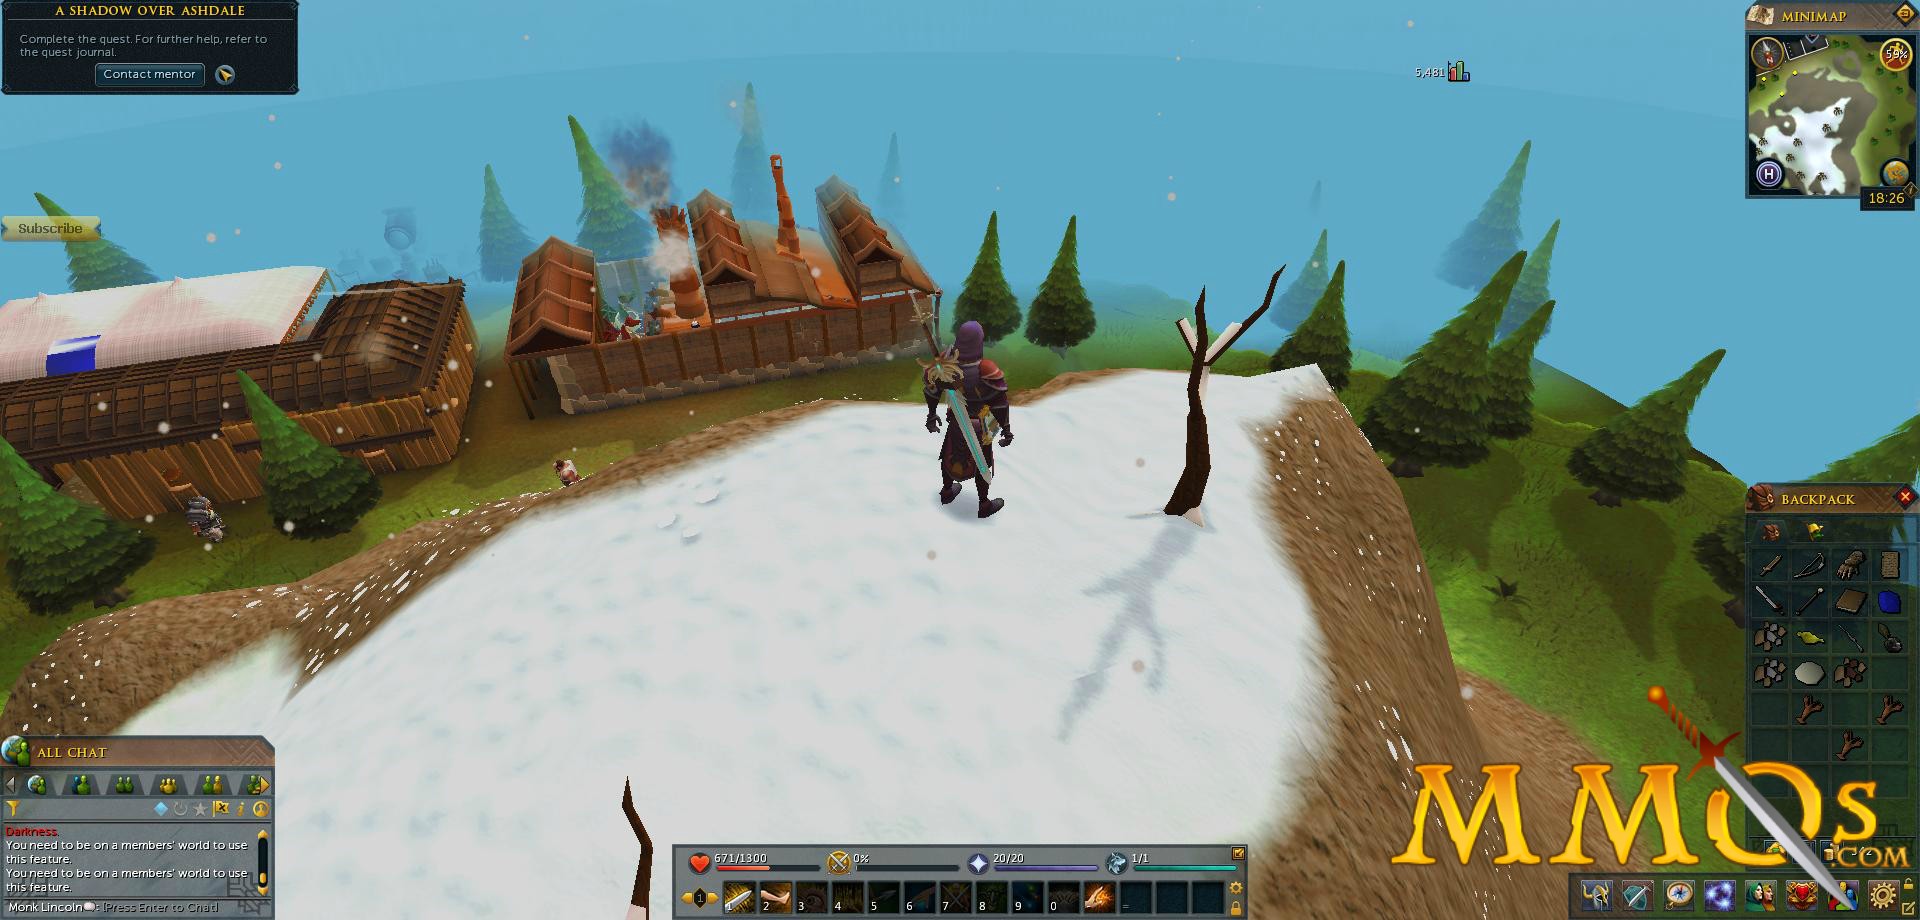 Old School Runescape sees the browser MMO dialled back to 2007